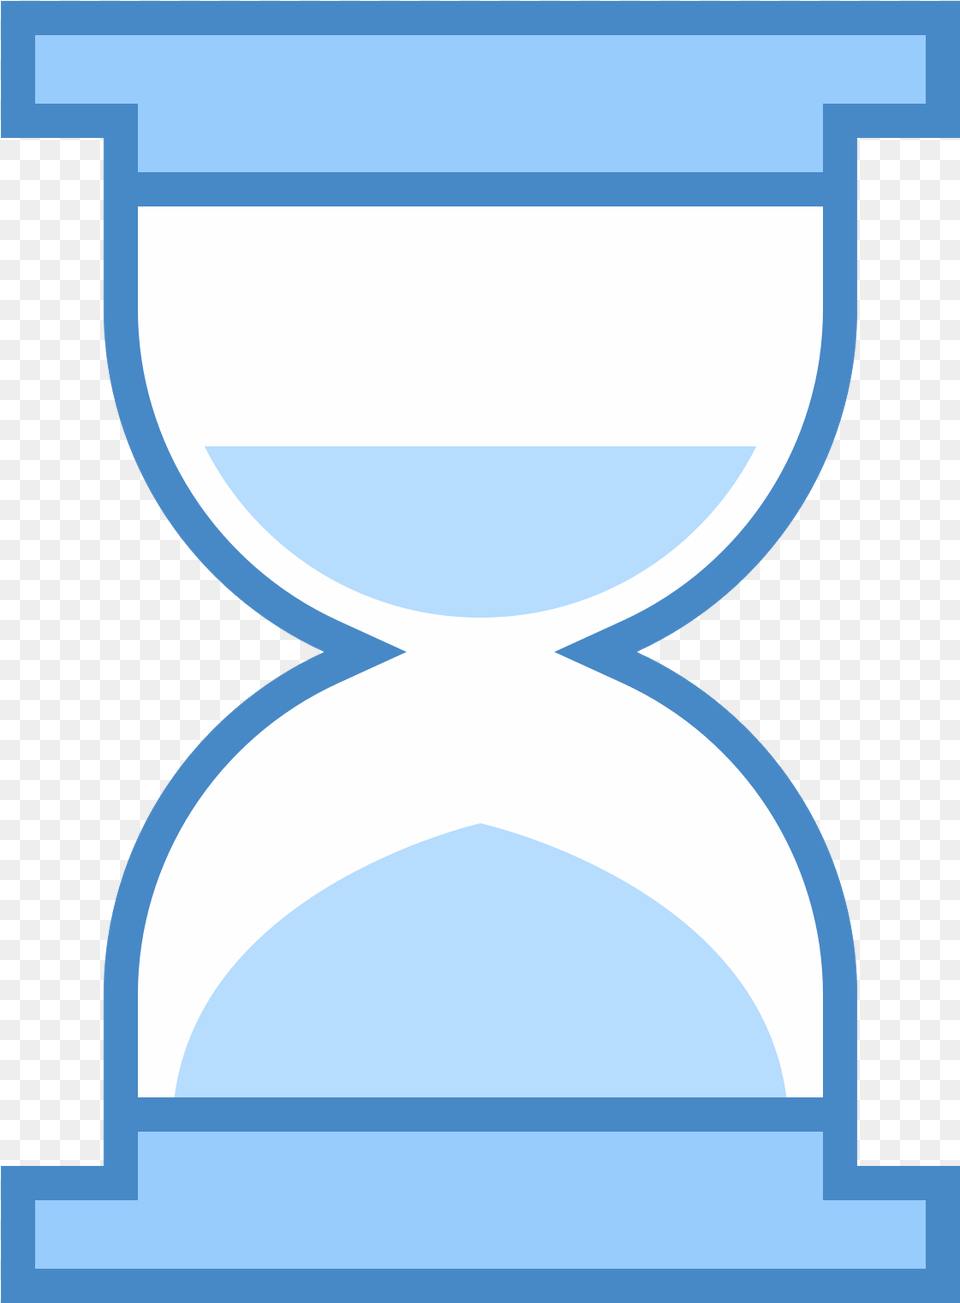 It S A Logo Of An Hourglass Reduced To An Image Of Icon Free Png